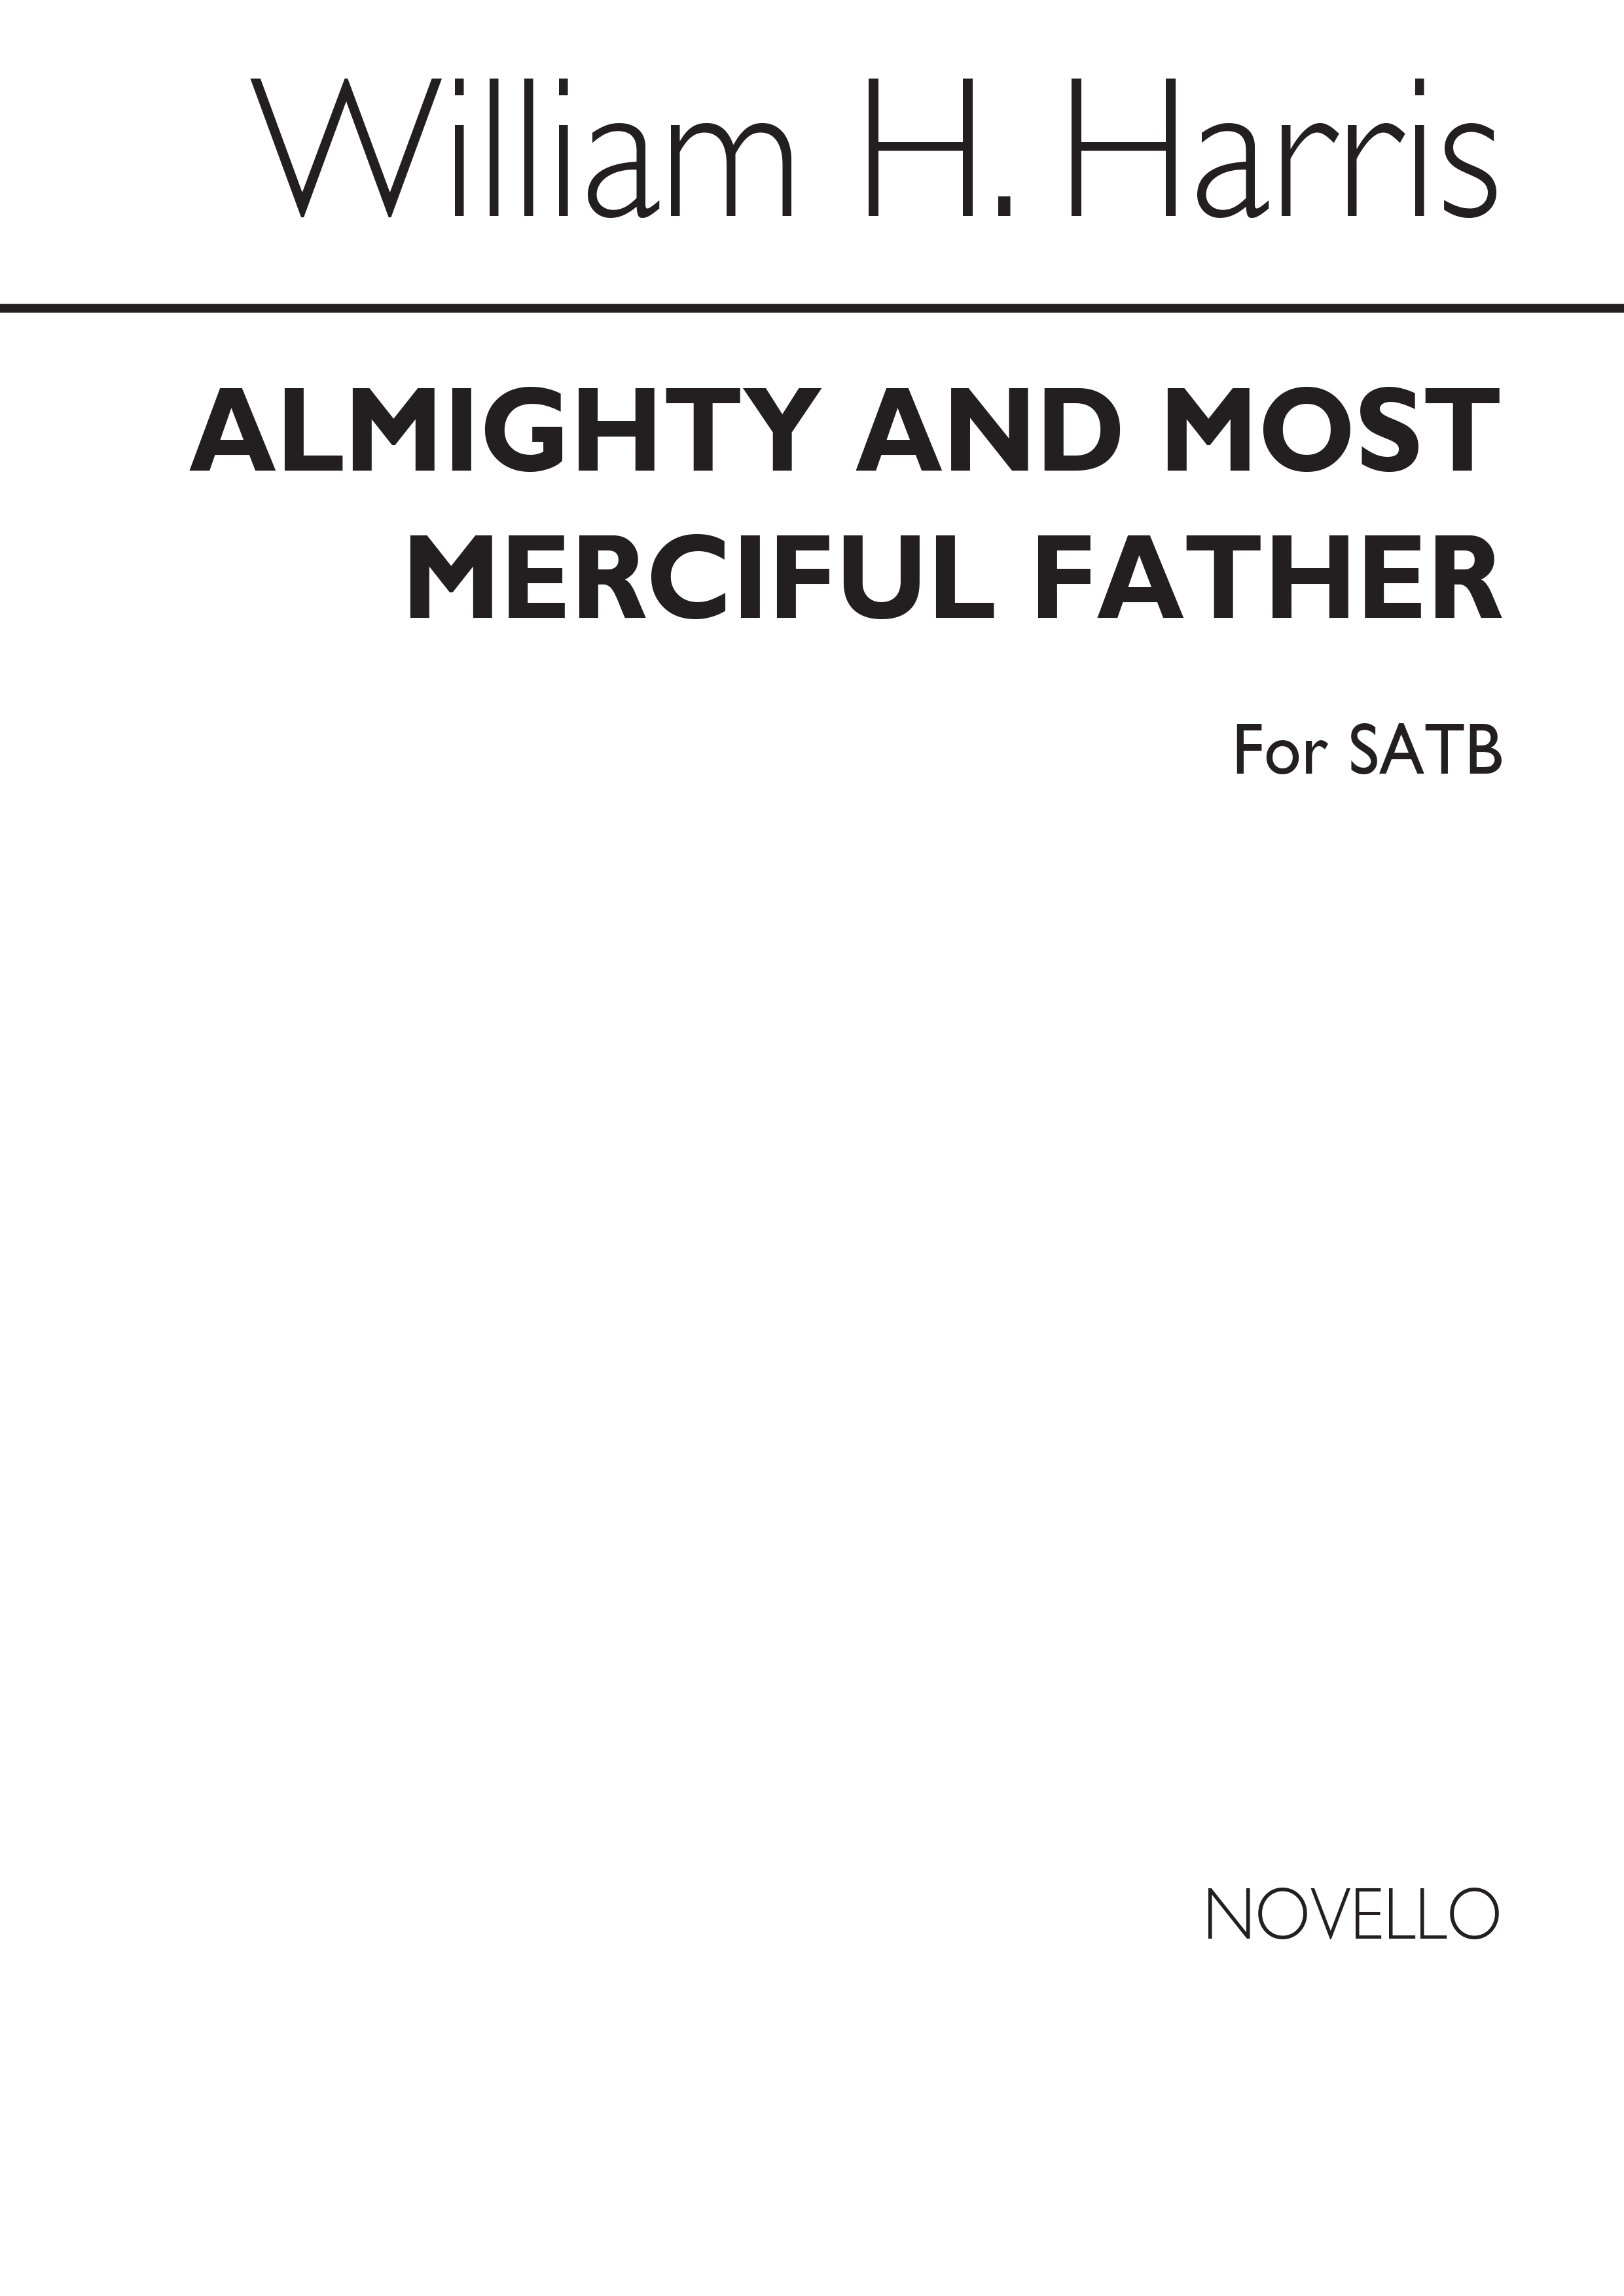 Sir William Henry Harris: Almighty And Most Merciful Father: SATB: Vocal Score